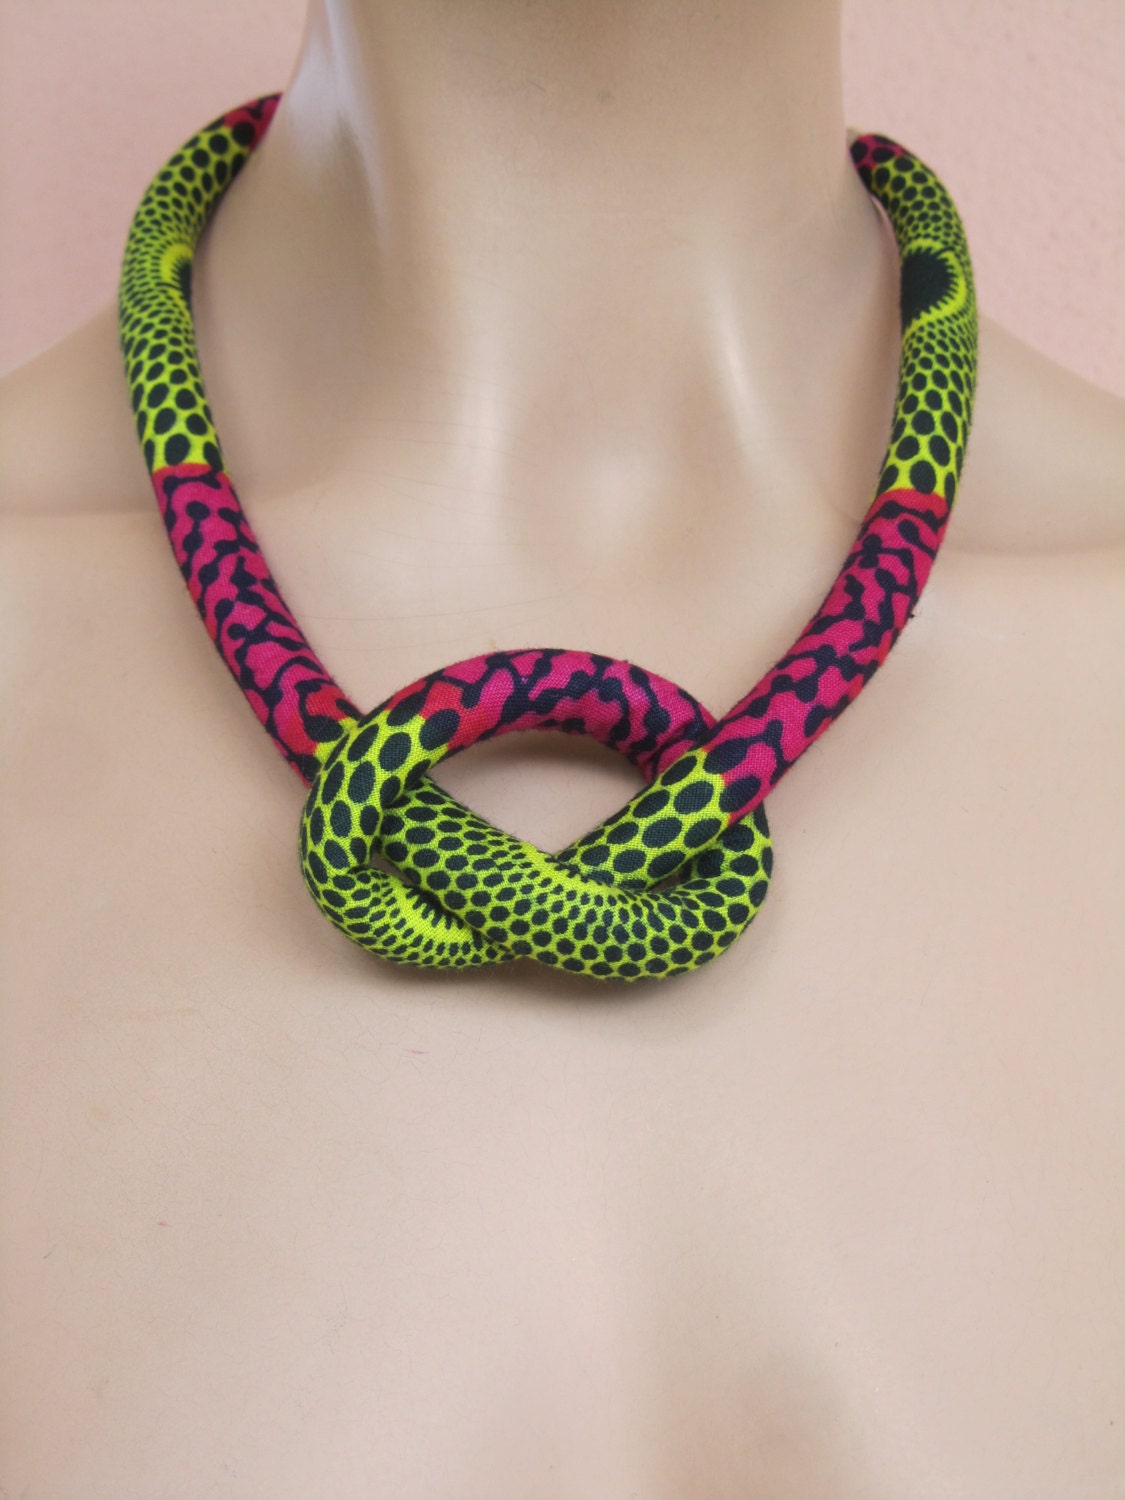 Single fabric cord necklace / wax print fabric necklace